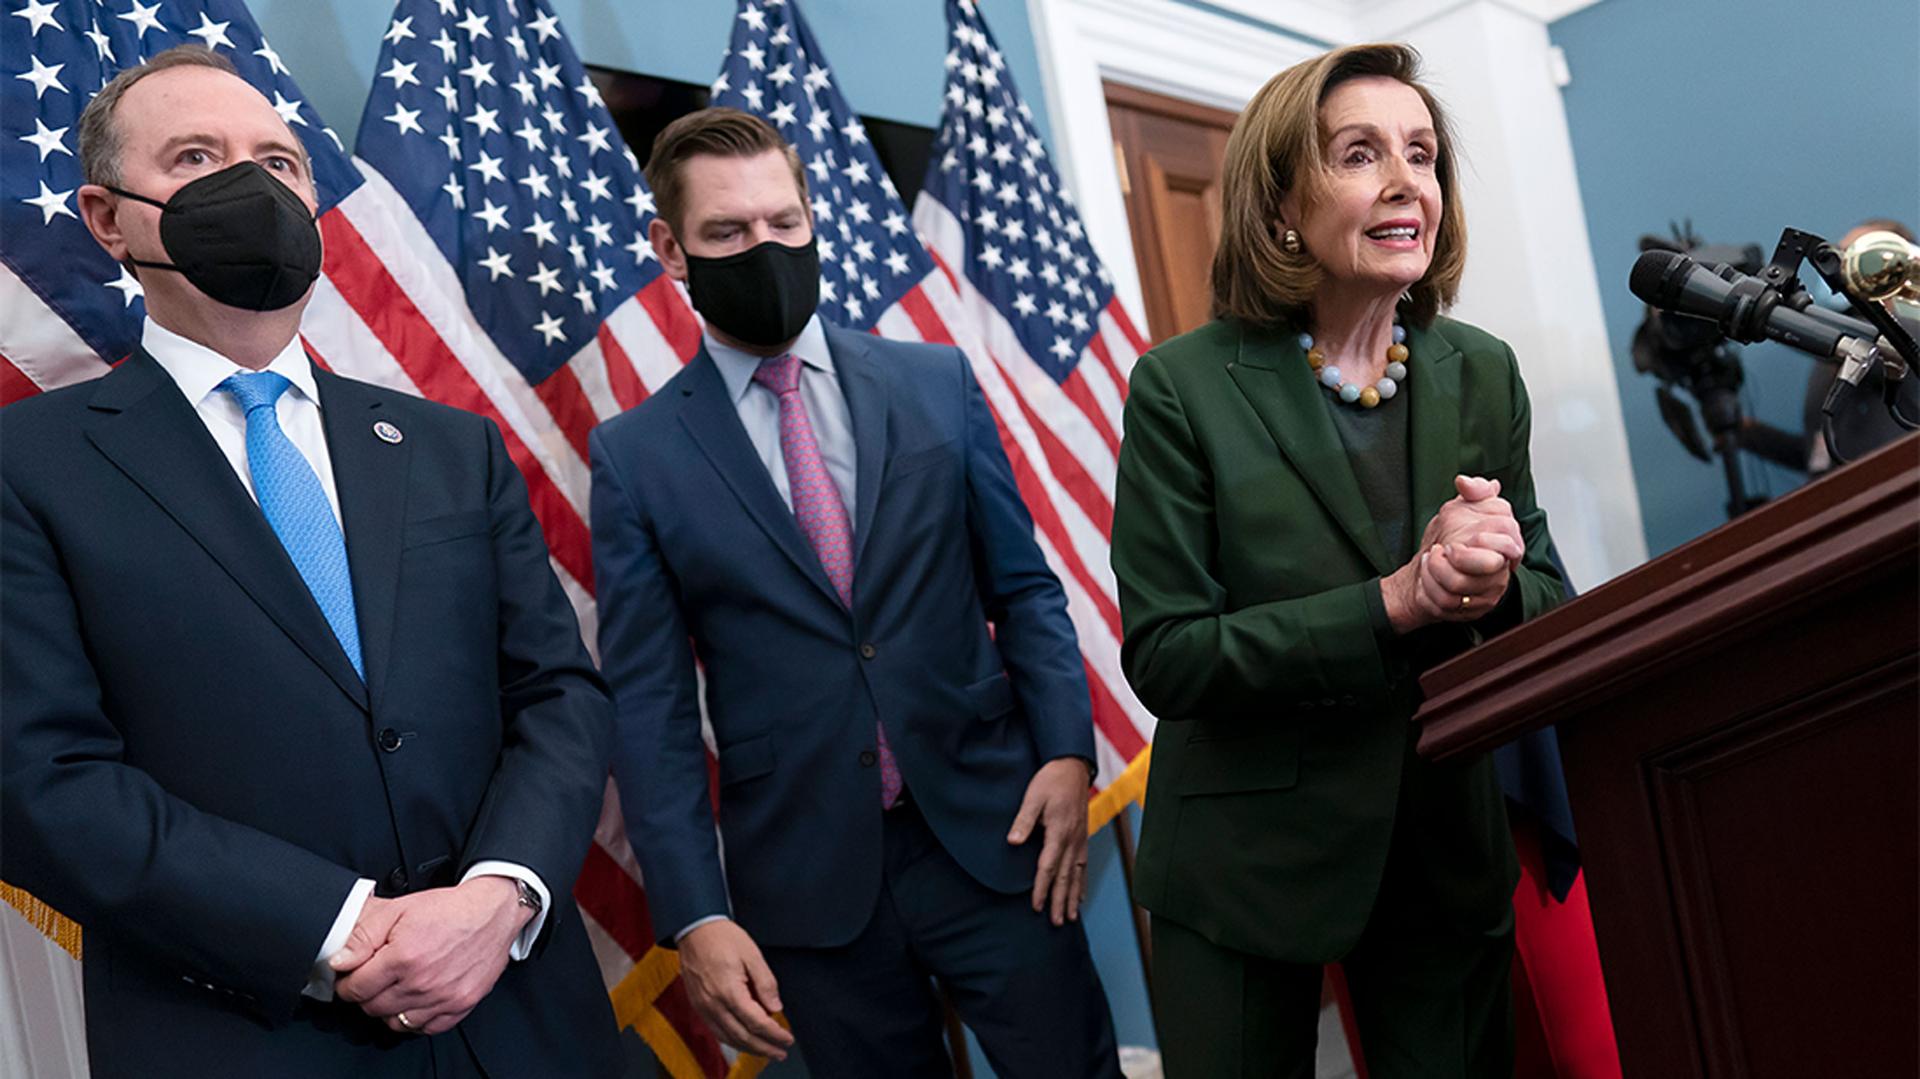 Speaker of the House Nancy Pelosi, joined by House Intelligence Committee Chairman Adam Schiff and Rep. Eric Swalwell, holds a news conference at the Capitol in Washington